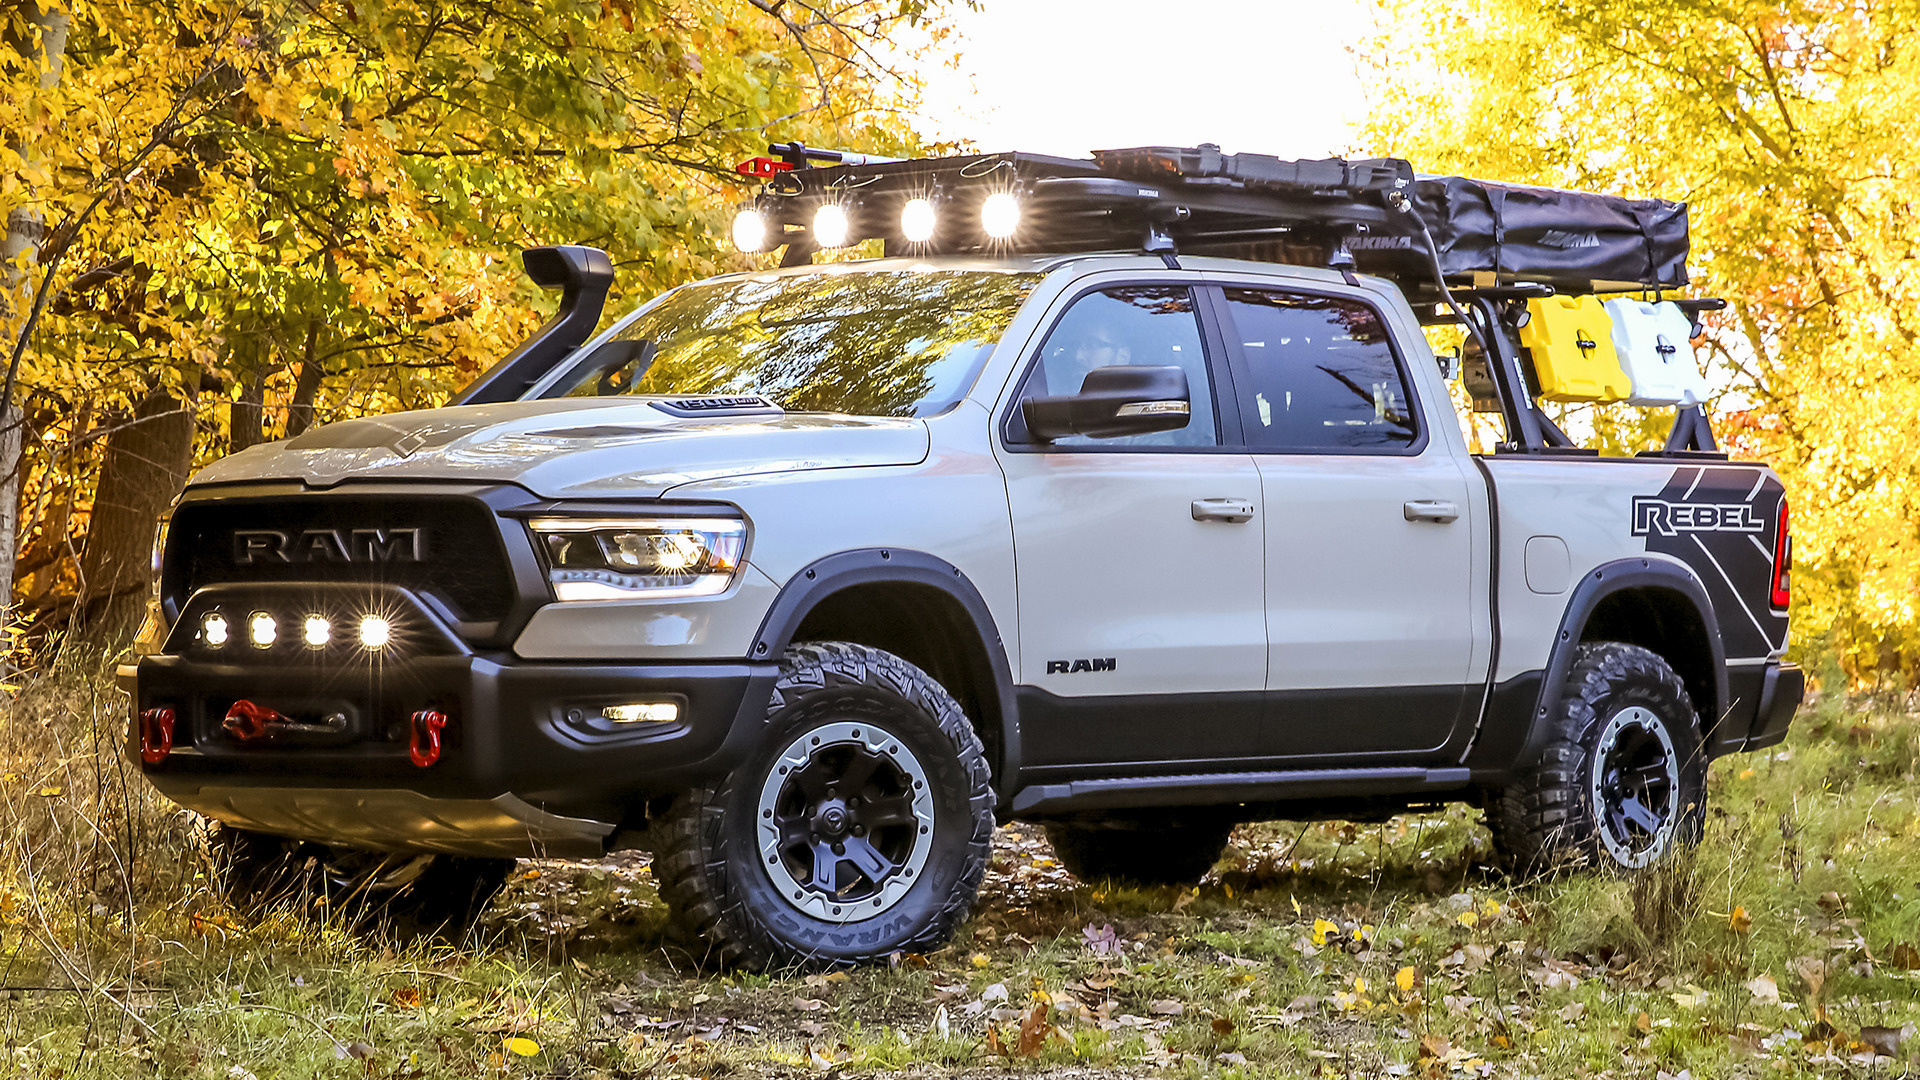 Free download ram rebel otg concept wallpapers and hd images car pixel x for your desktop mobile tablet explore ram rebel wallpapers rebel flag backgrounds rebel wallpaper dodge ram wallpaper